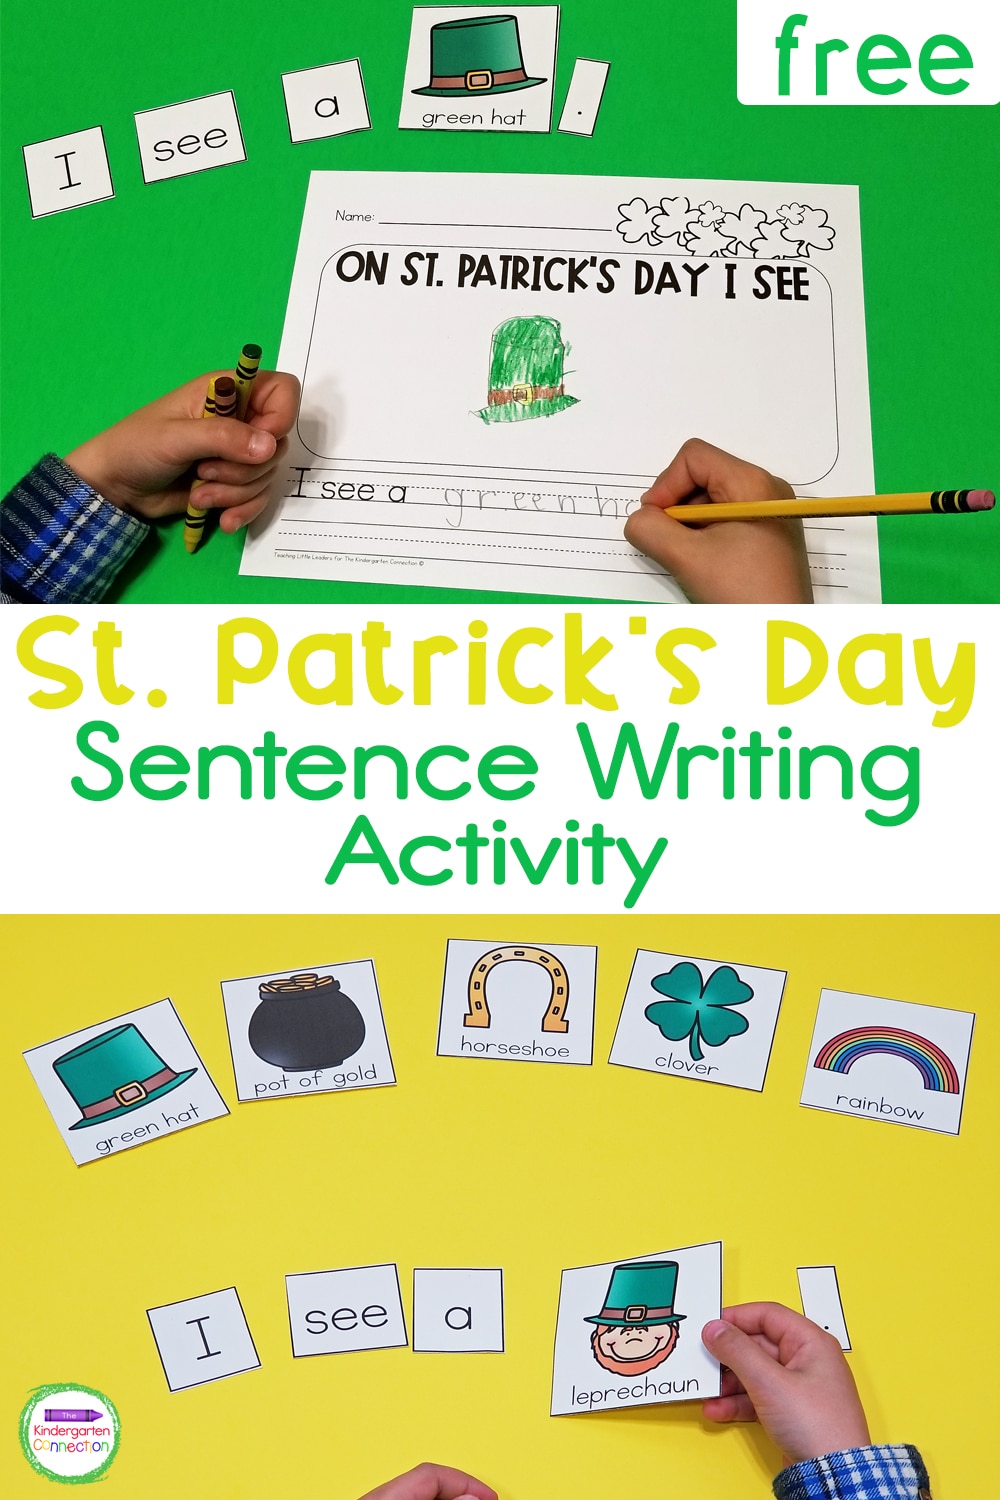 Grab this FREE St. Patrick's Day Sentence Writing Activity for Kindergarten and bring some seasonal fun to your literacy centers!